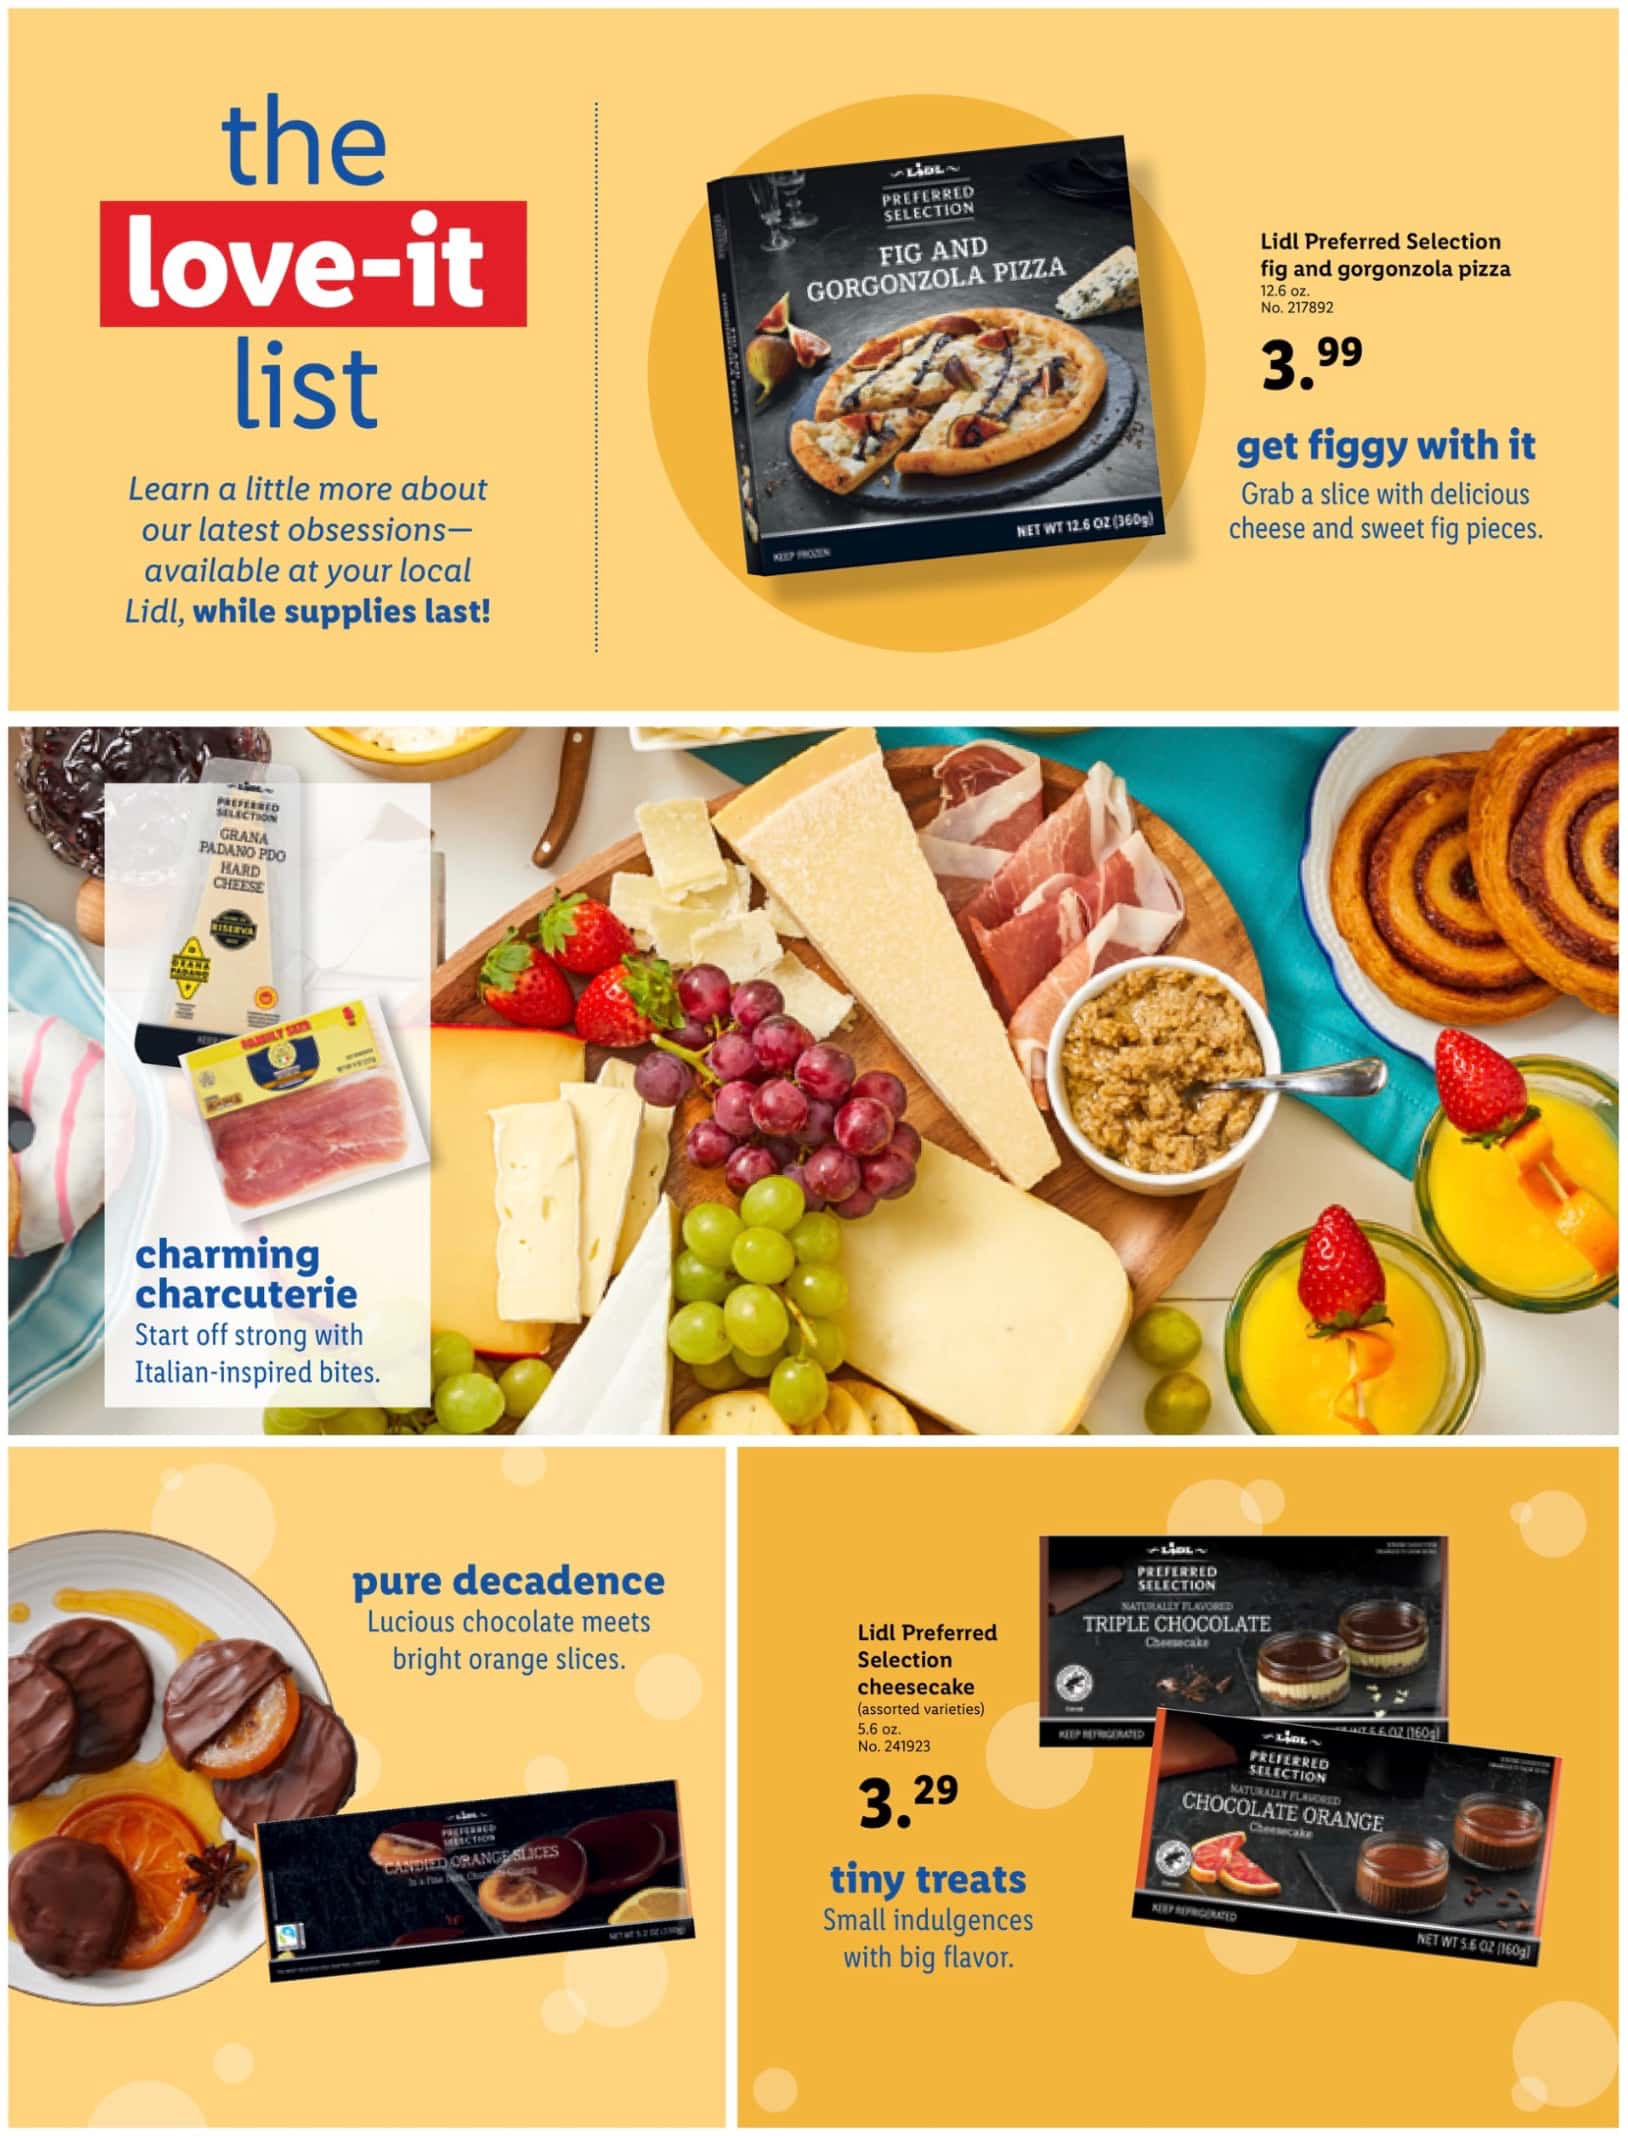 Lidl_weekly_ad_022224_02